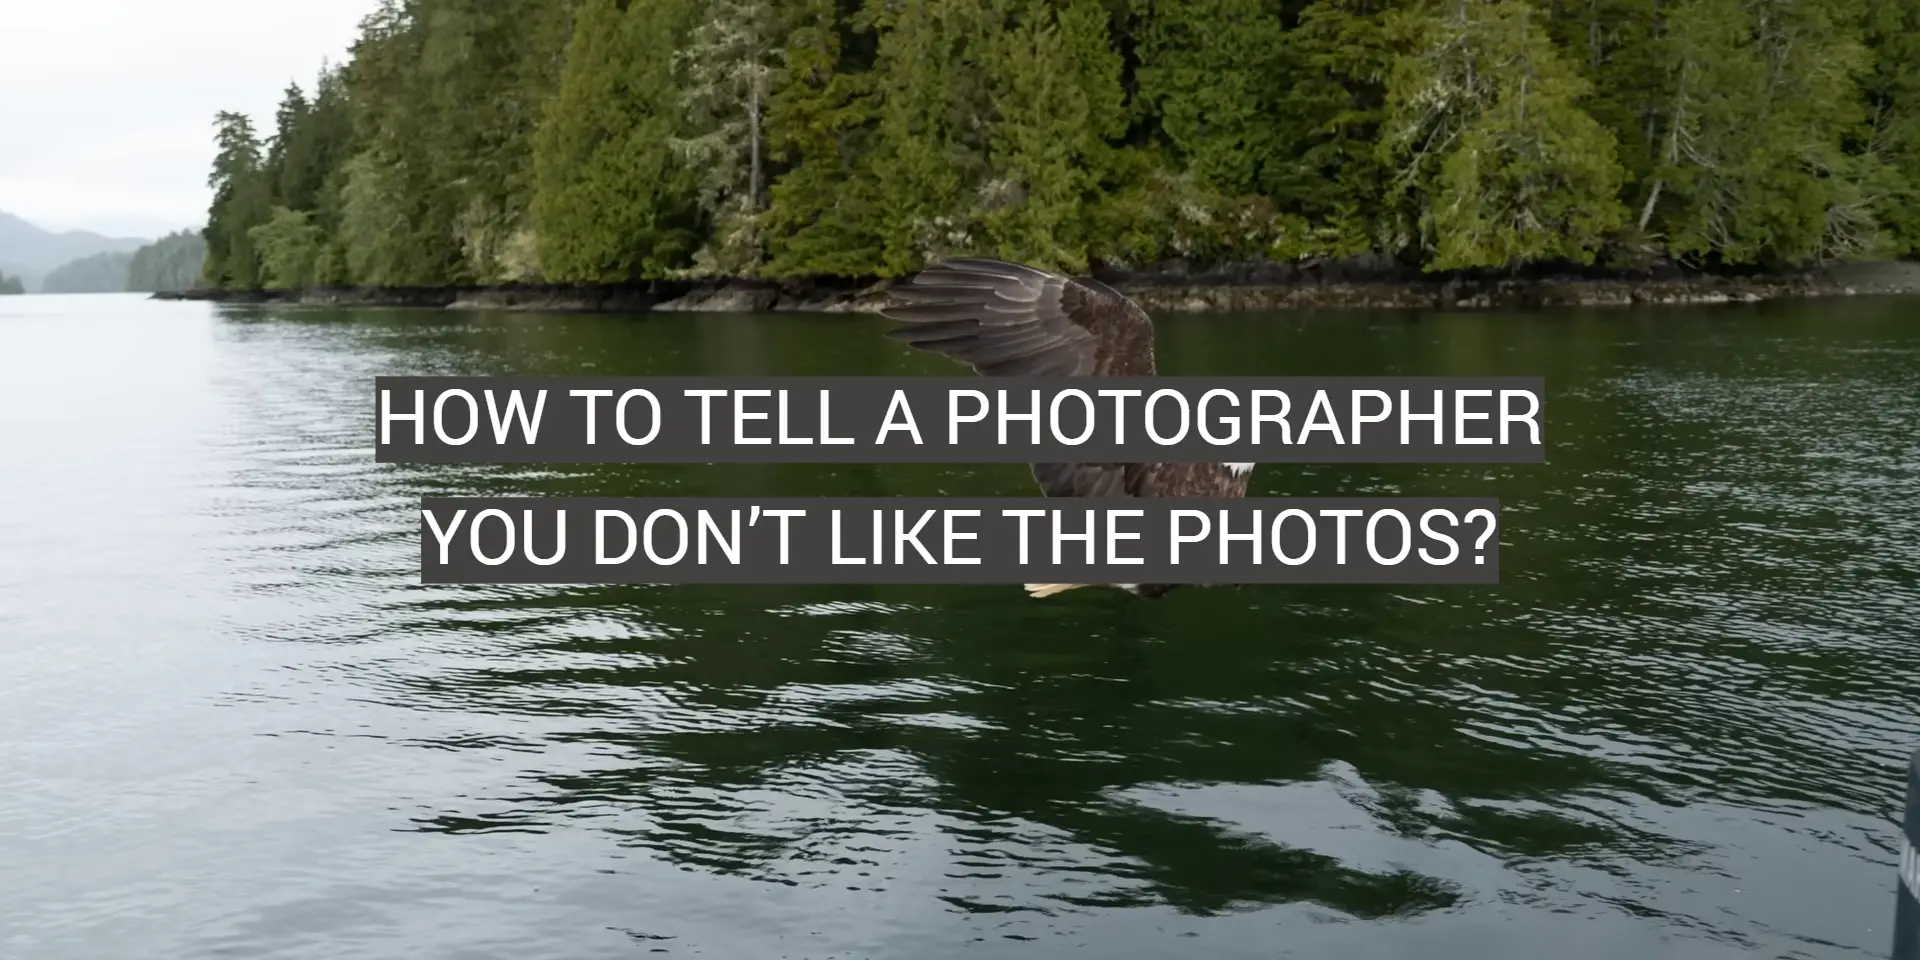 How to Tell a Photographer You Don’t Like the Photos?